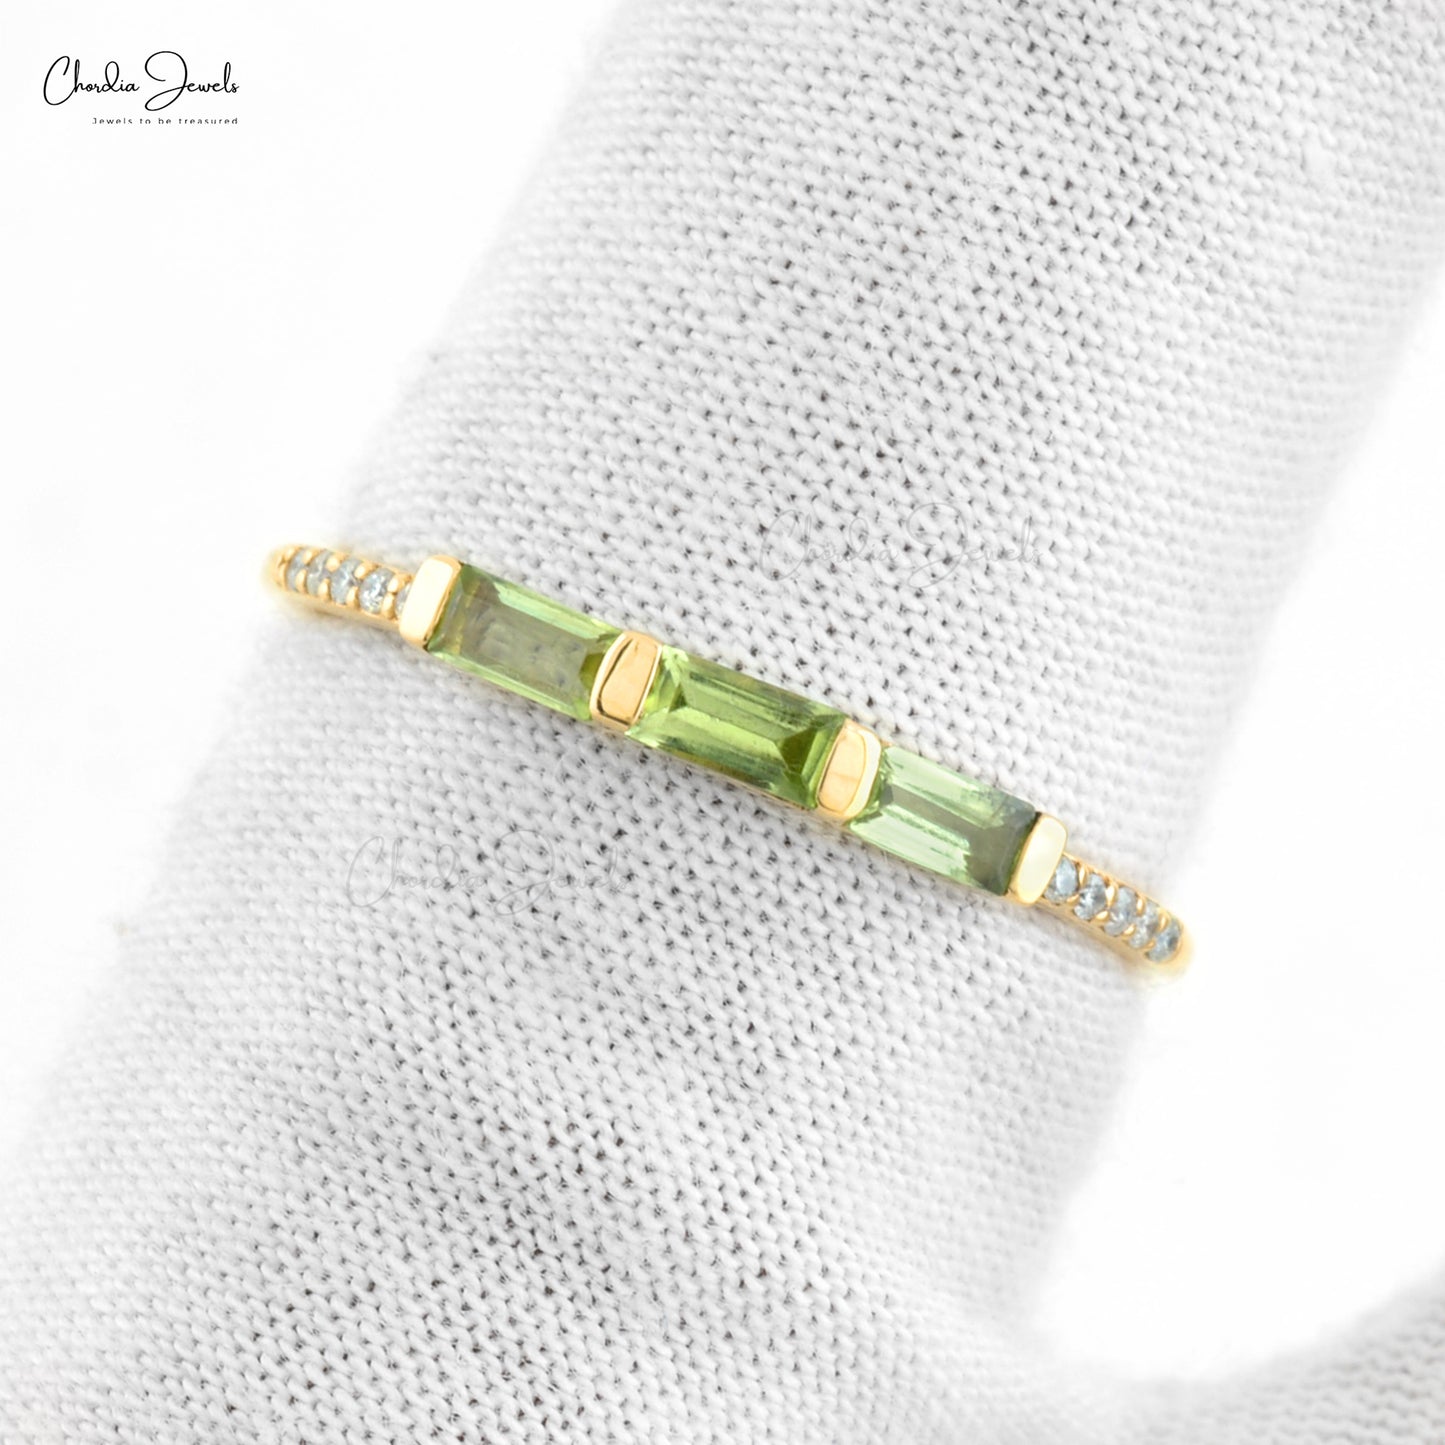 Solid 14k Yellow Gold Diamond Dainty Ring with Genuine 0.24ct Peridot For Wedding Gift